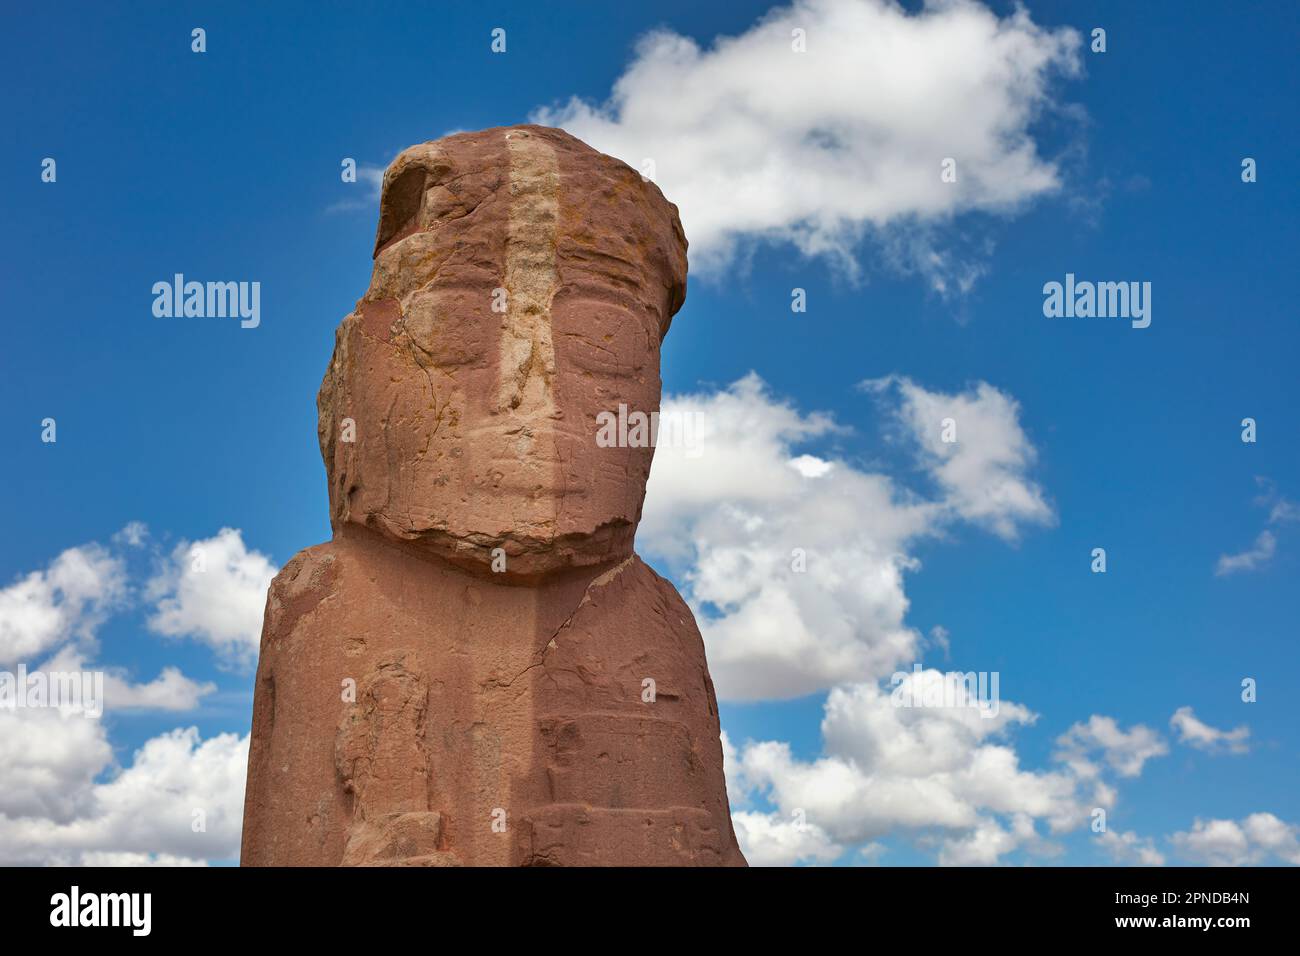 A giant monolith in Tiwanaku, a pre-Columbian archaeological site in western Bolivia. One of the largest sites in South America. Stock Photo